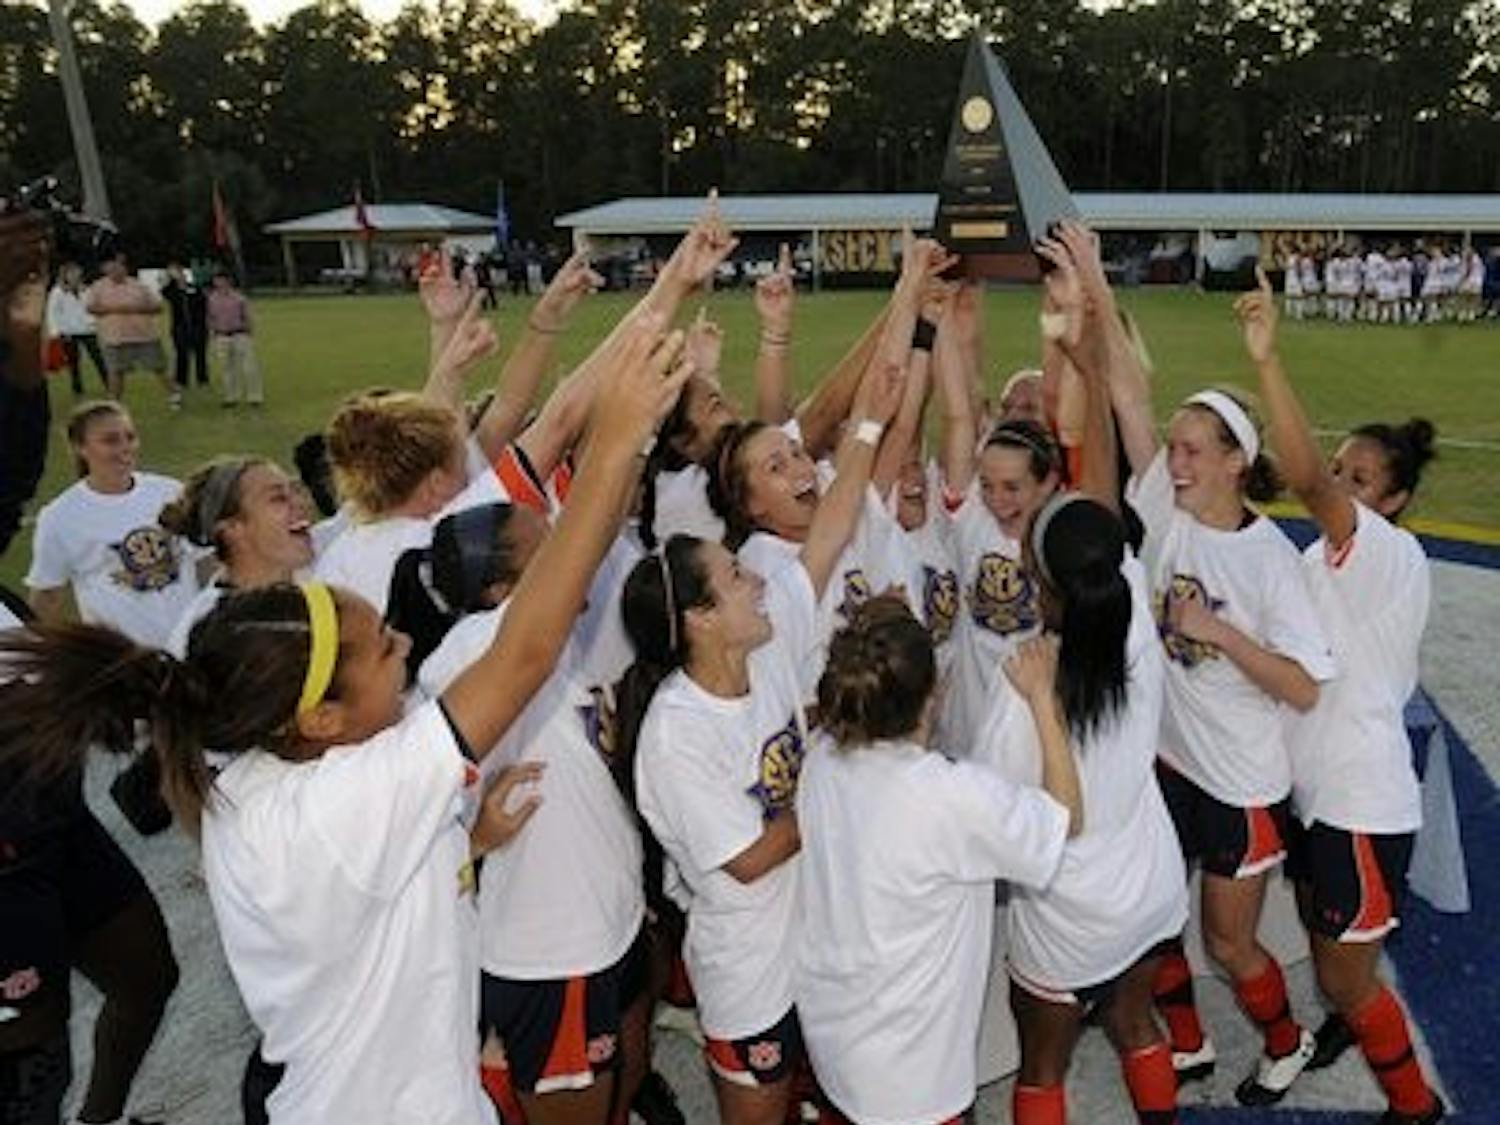 The women of the Auburn soccer team celebrate and hoist the championship trophy after winning their first-ever SEC Tournament after a 3-2 victory over Florida. (Todd Van Emst)